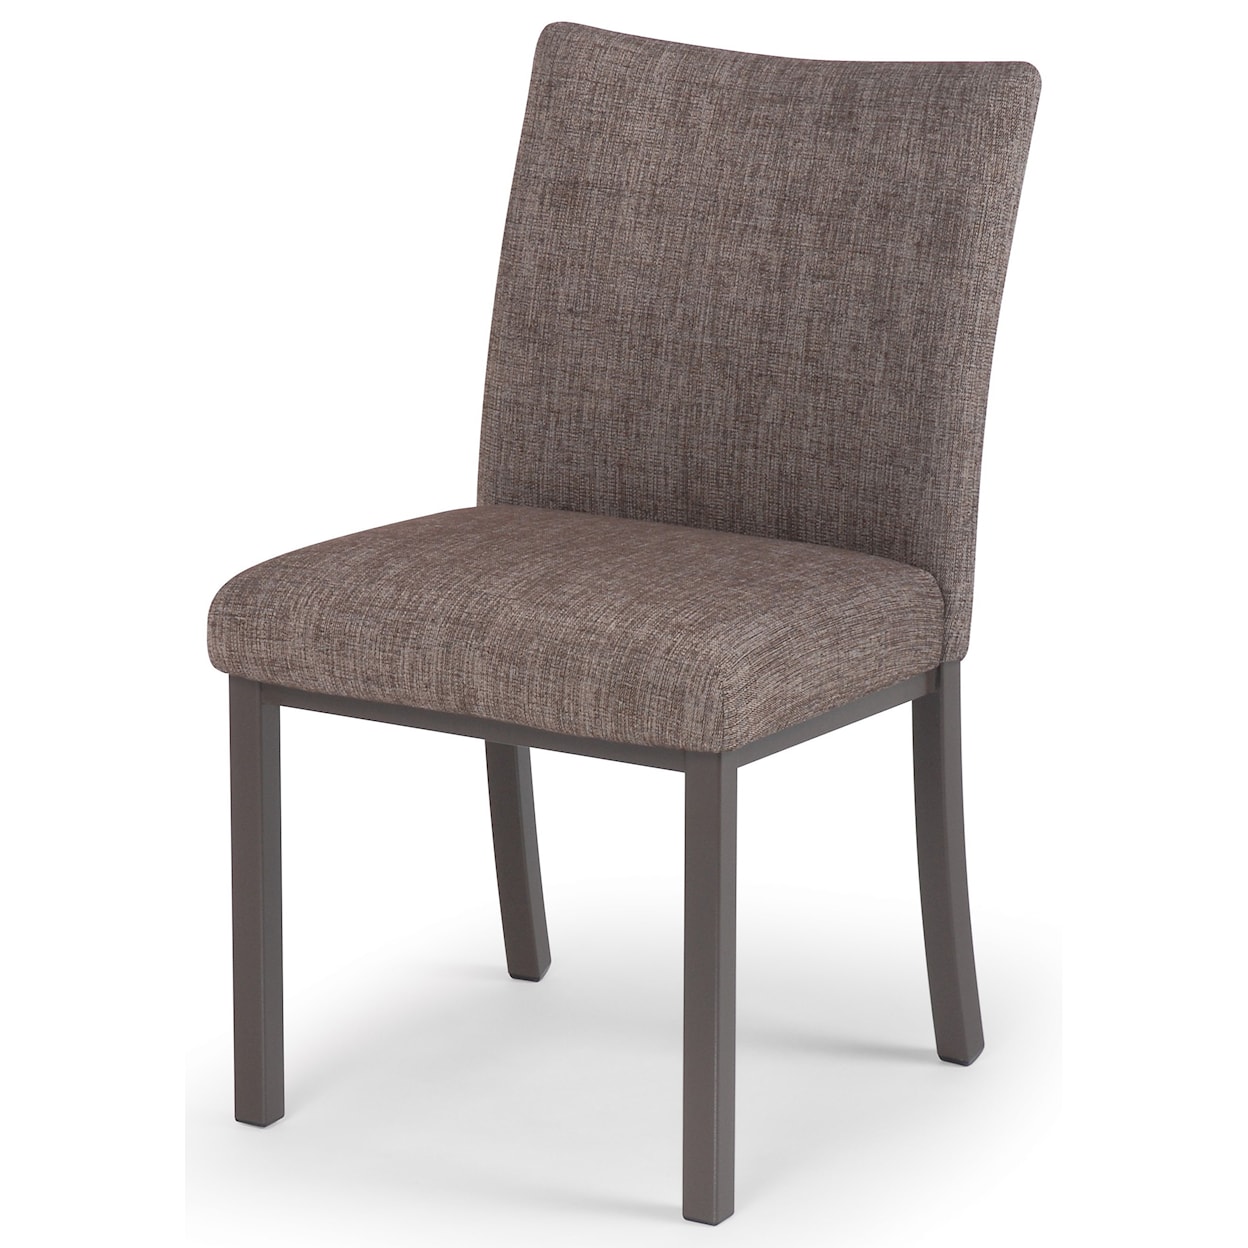 Trica Contemporary Seating Biscaro Plus Side Chair